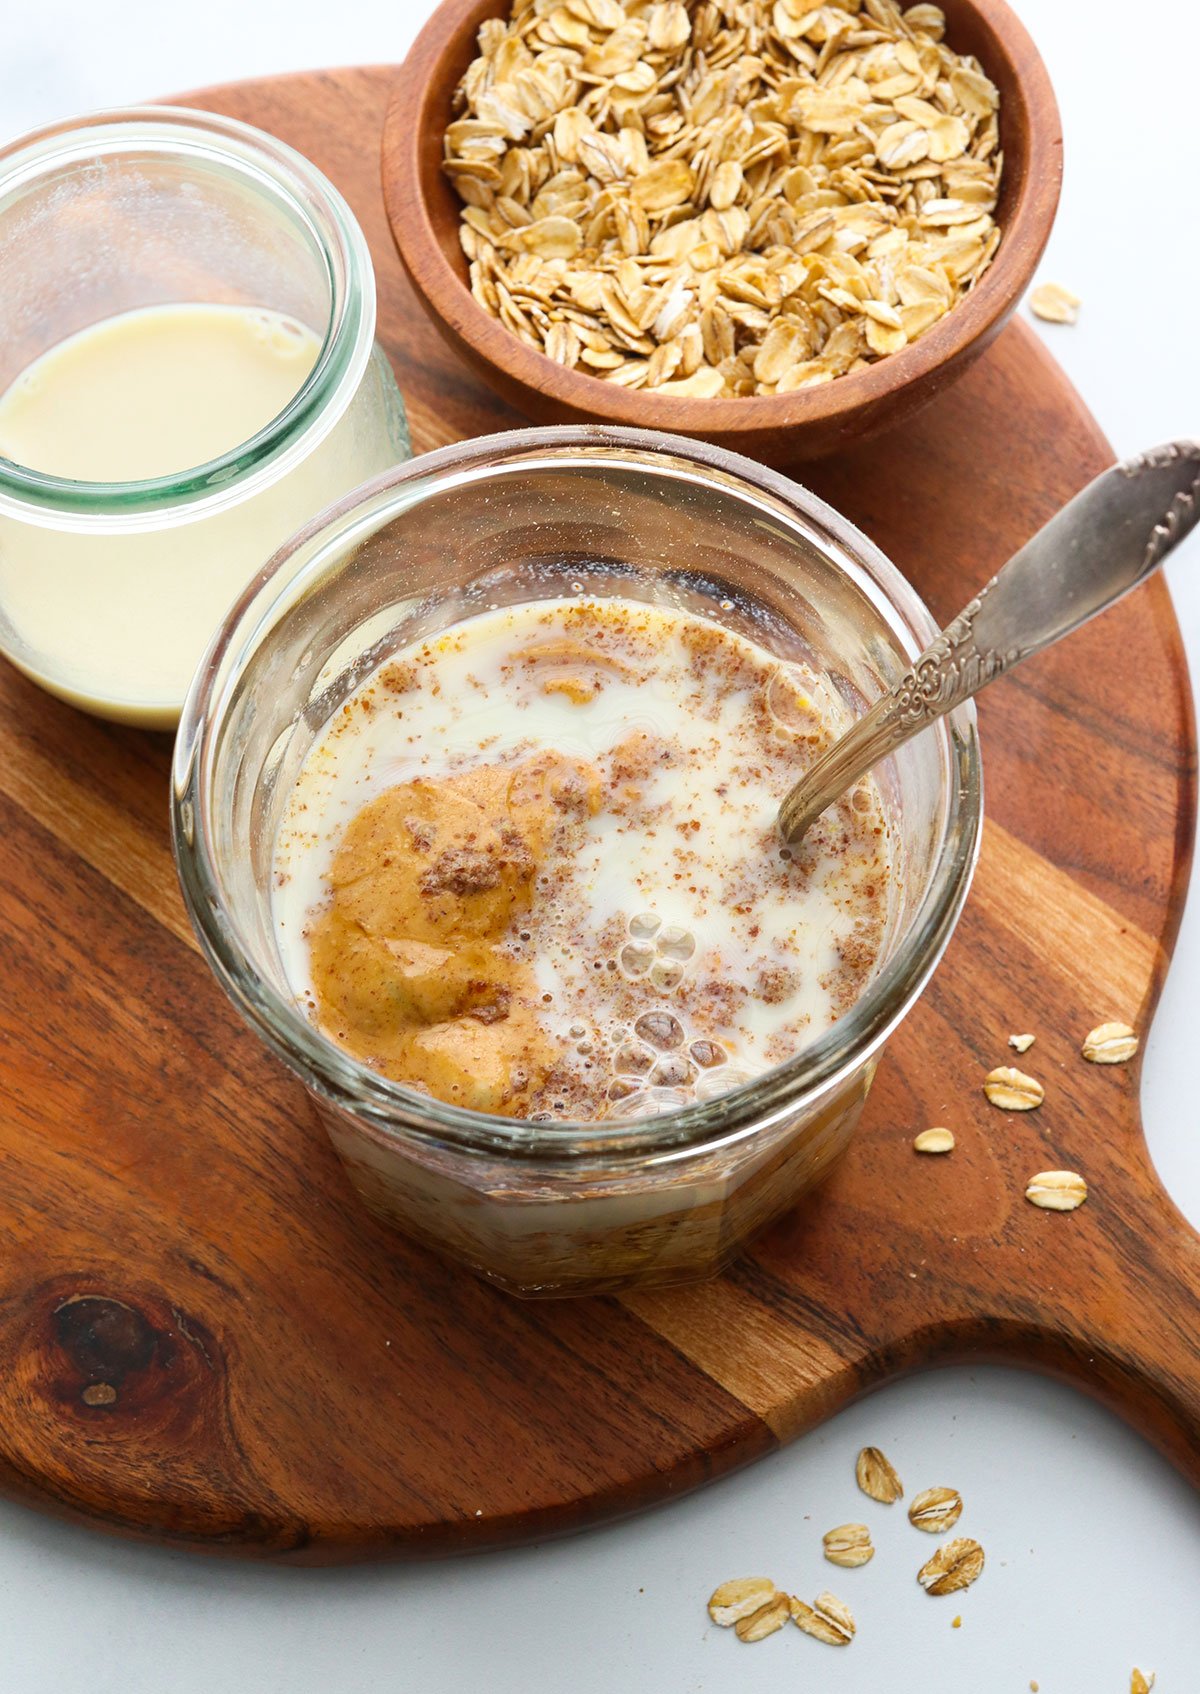 overnight oats ingredients added to a glass jar with a spoon.